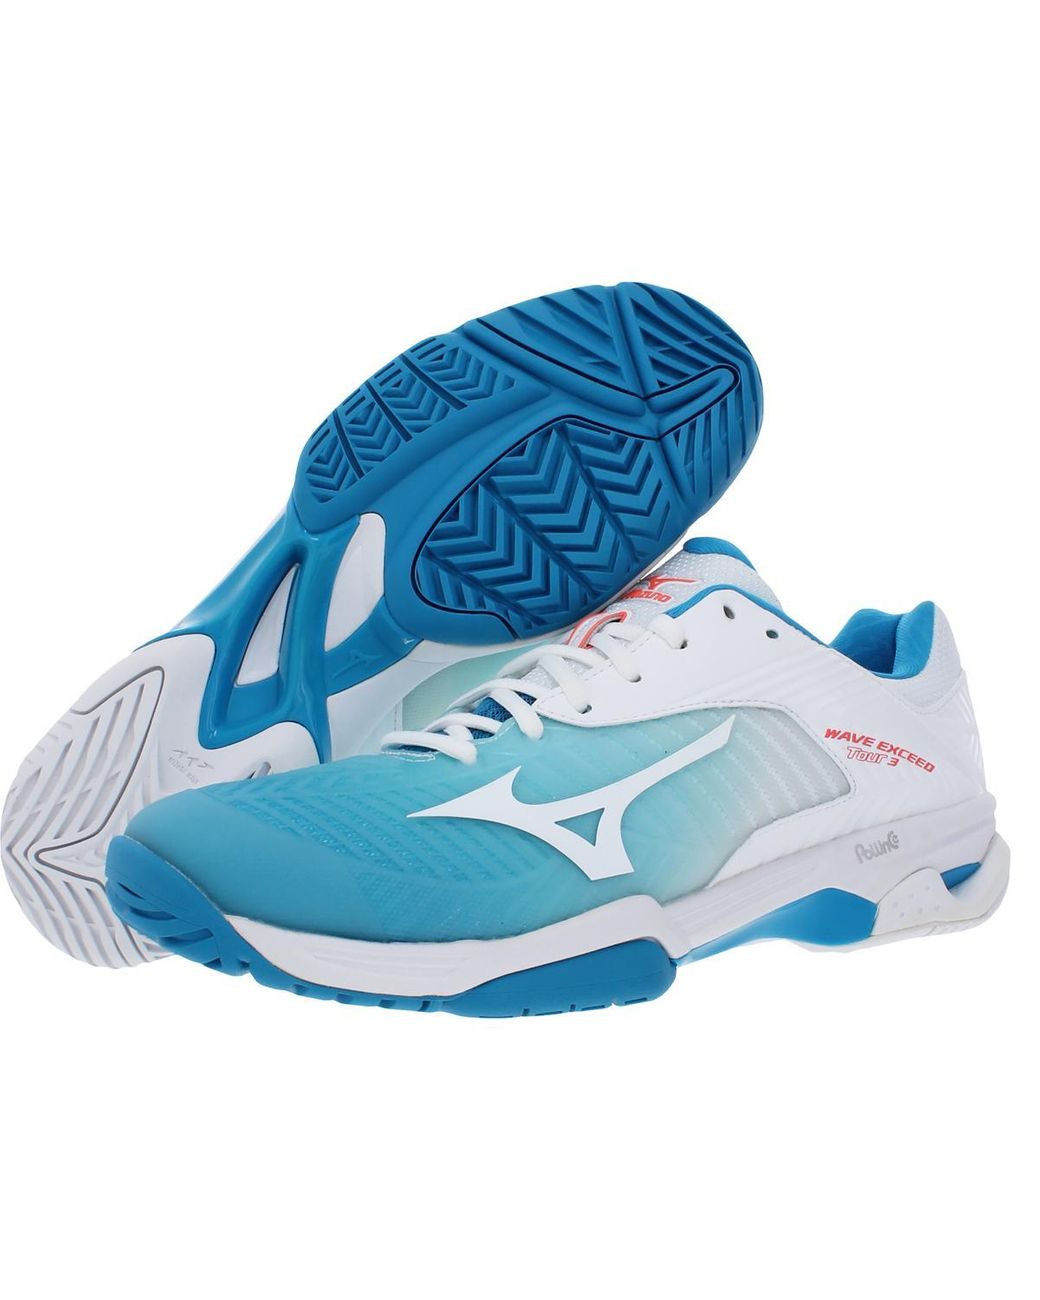 Mizuno Wave Exceed Tour 3 Ac Performance Exercise Tennis Shoes in Blue |  Lyst